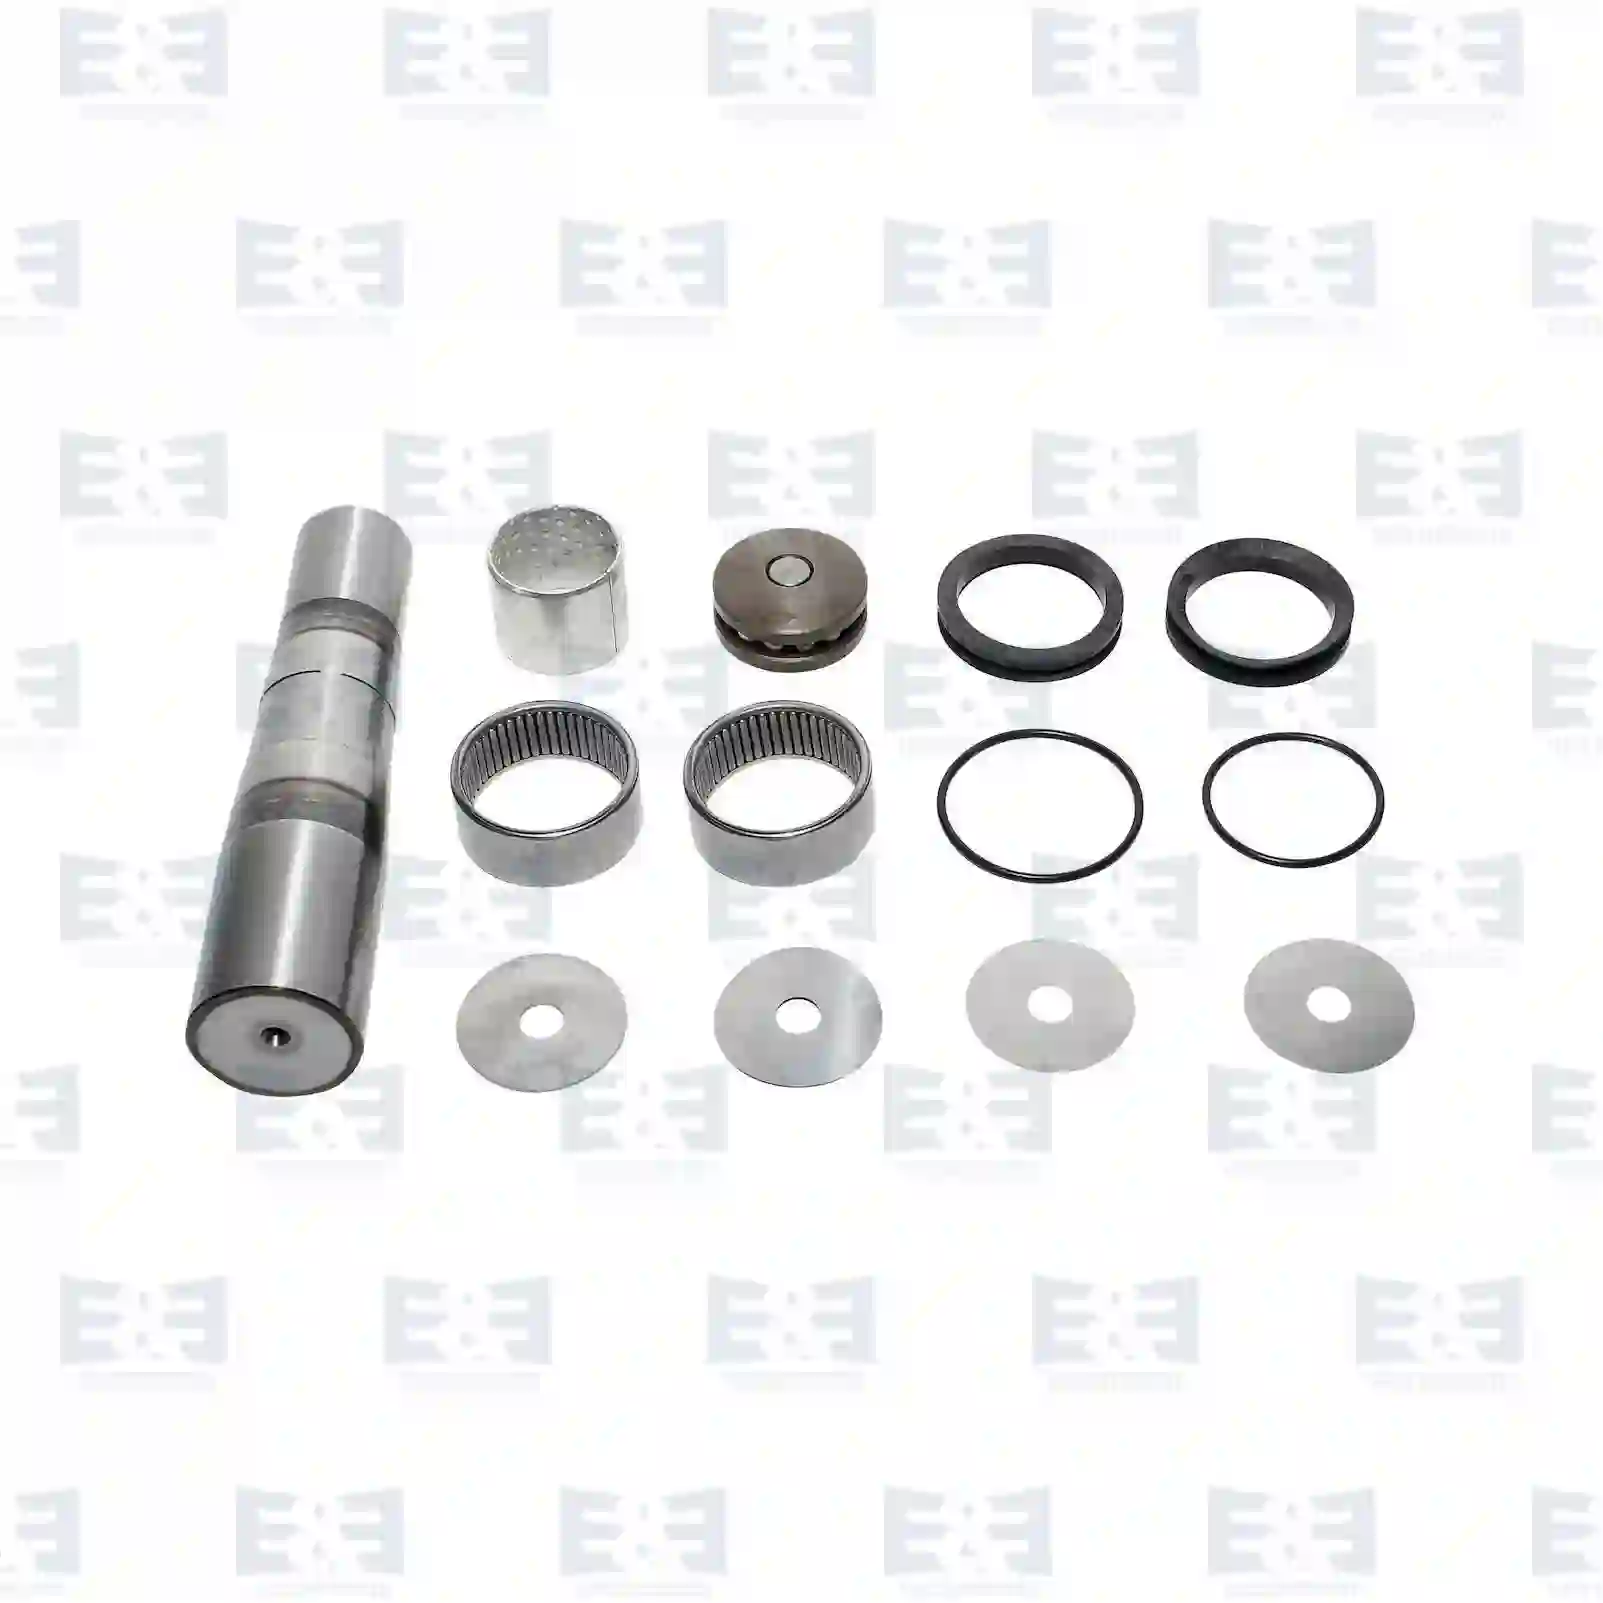  King pin kit || E&E Truck Spare Parts | Truck Spare Parts, Auotomotive Spare Parts